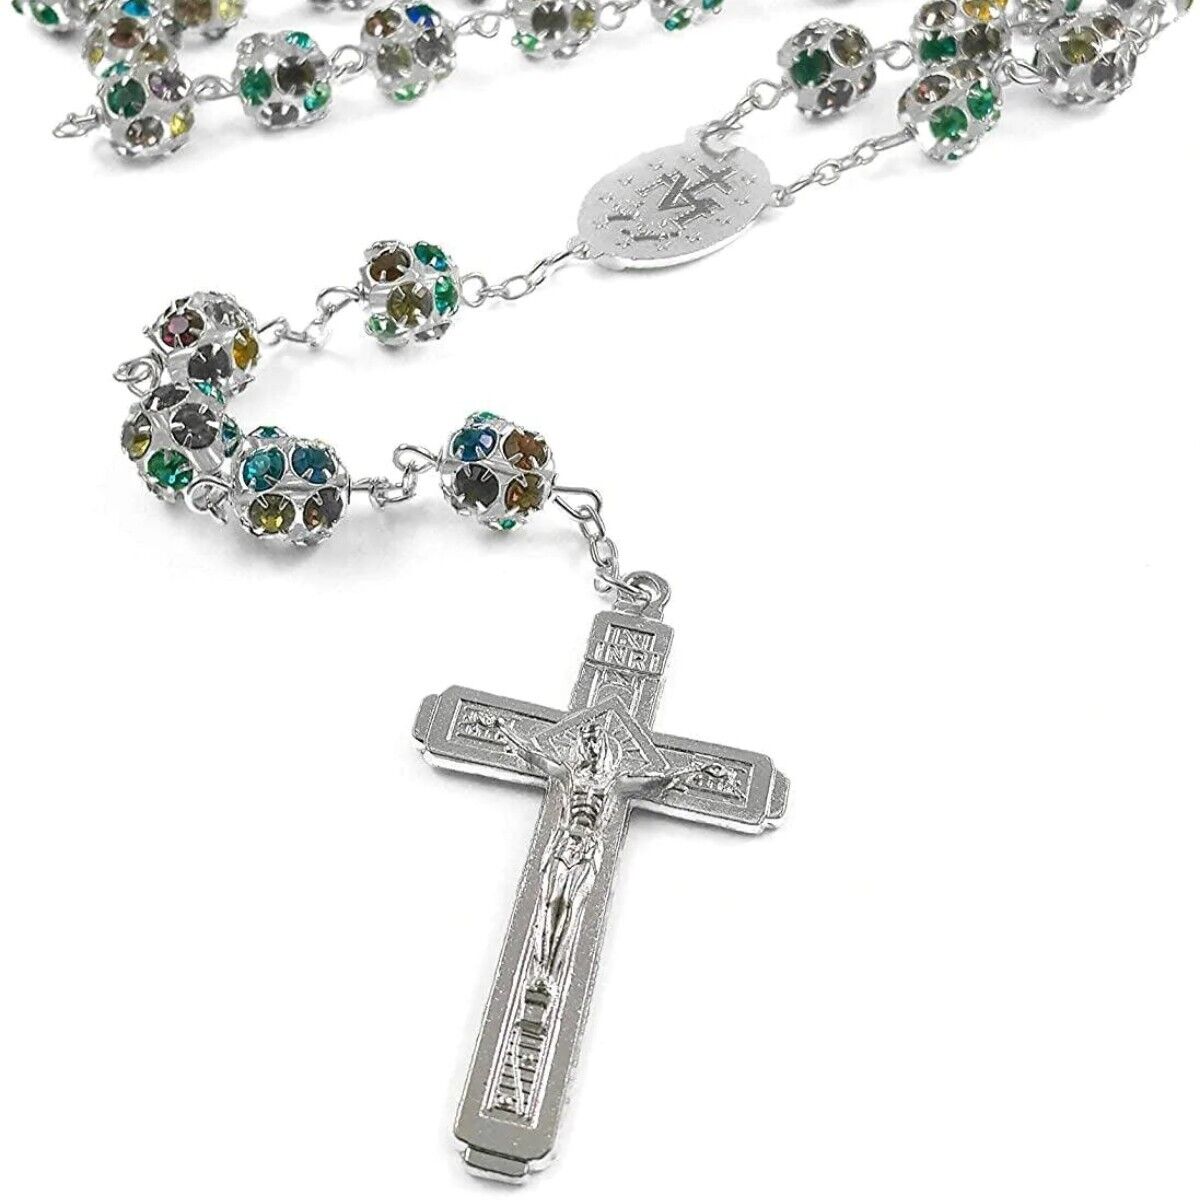 Colorful Crystal Beads Rosary Catholic Necklace from the Holy Land of Jerusalem